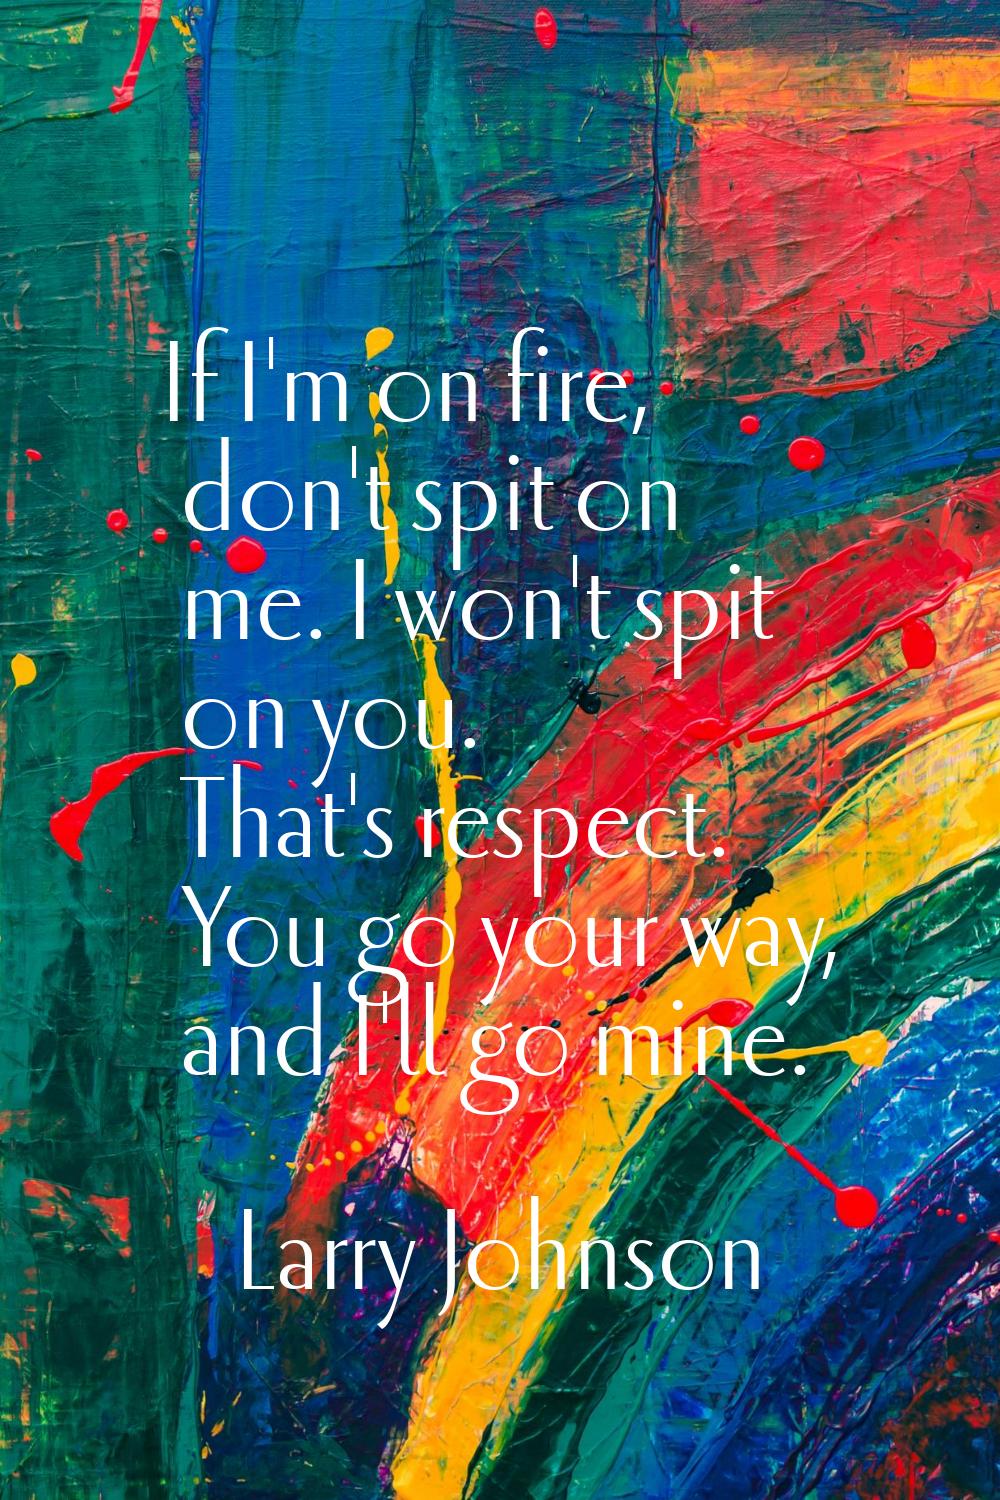 If I'm on fire, don't spit on me. I won't spit on you. That's respect. You go your way, and I'll go